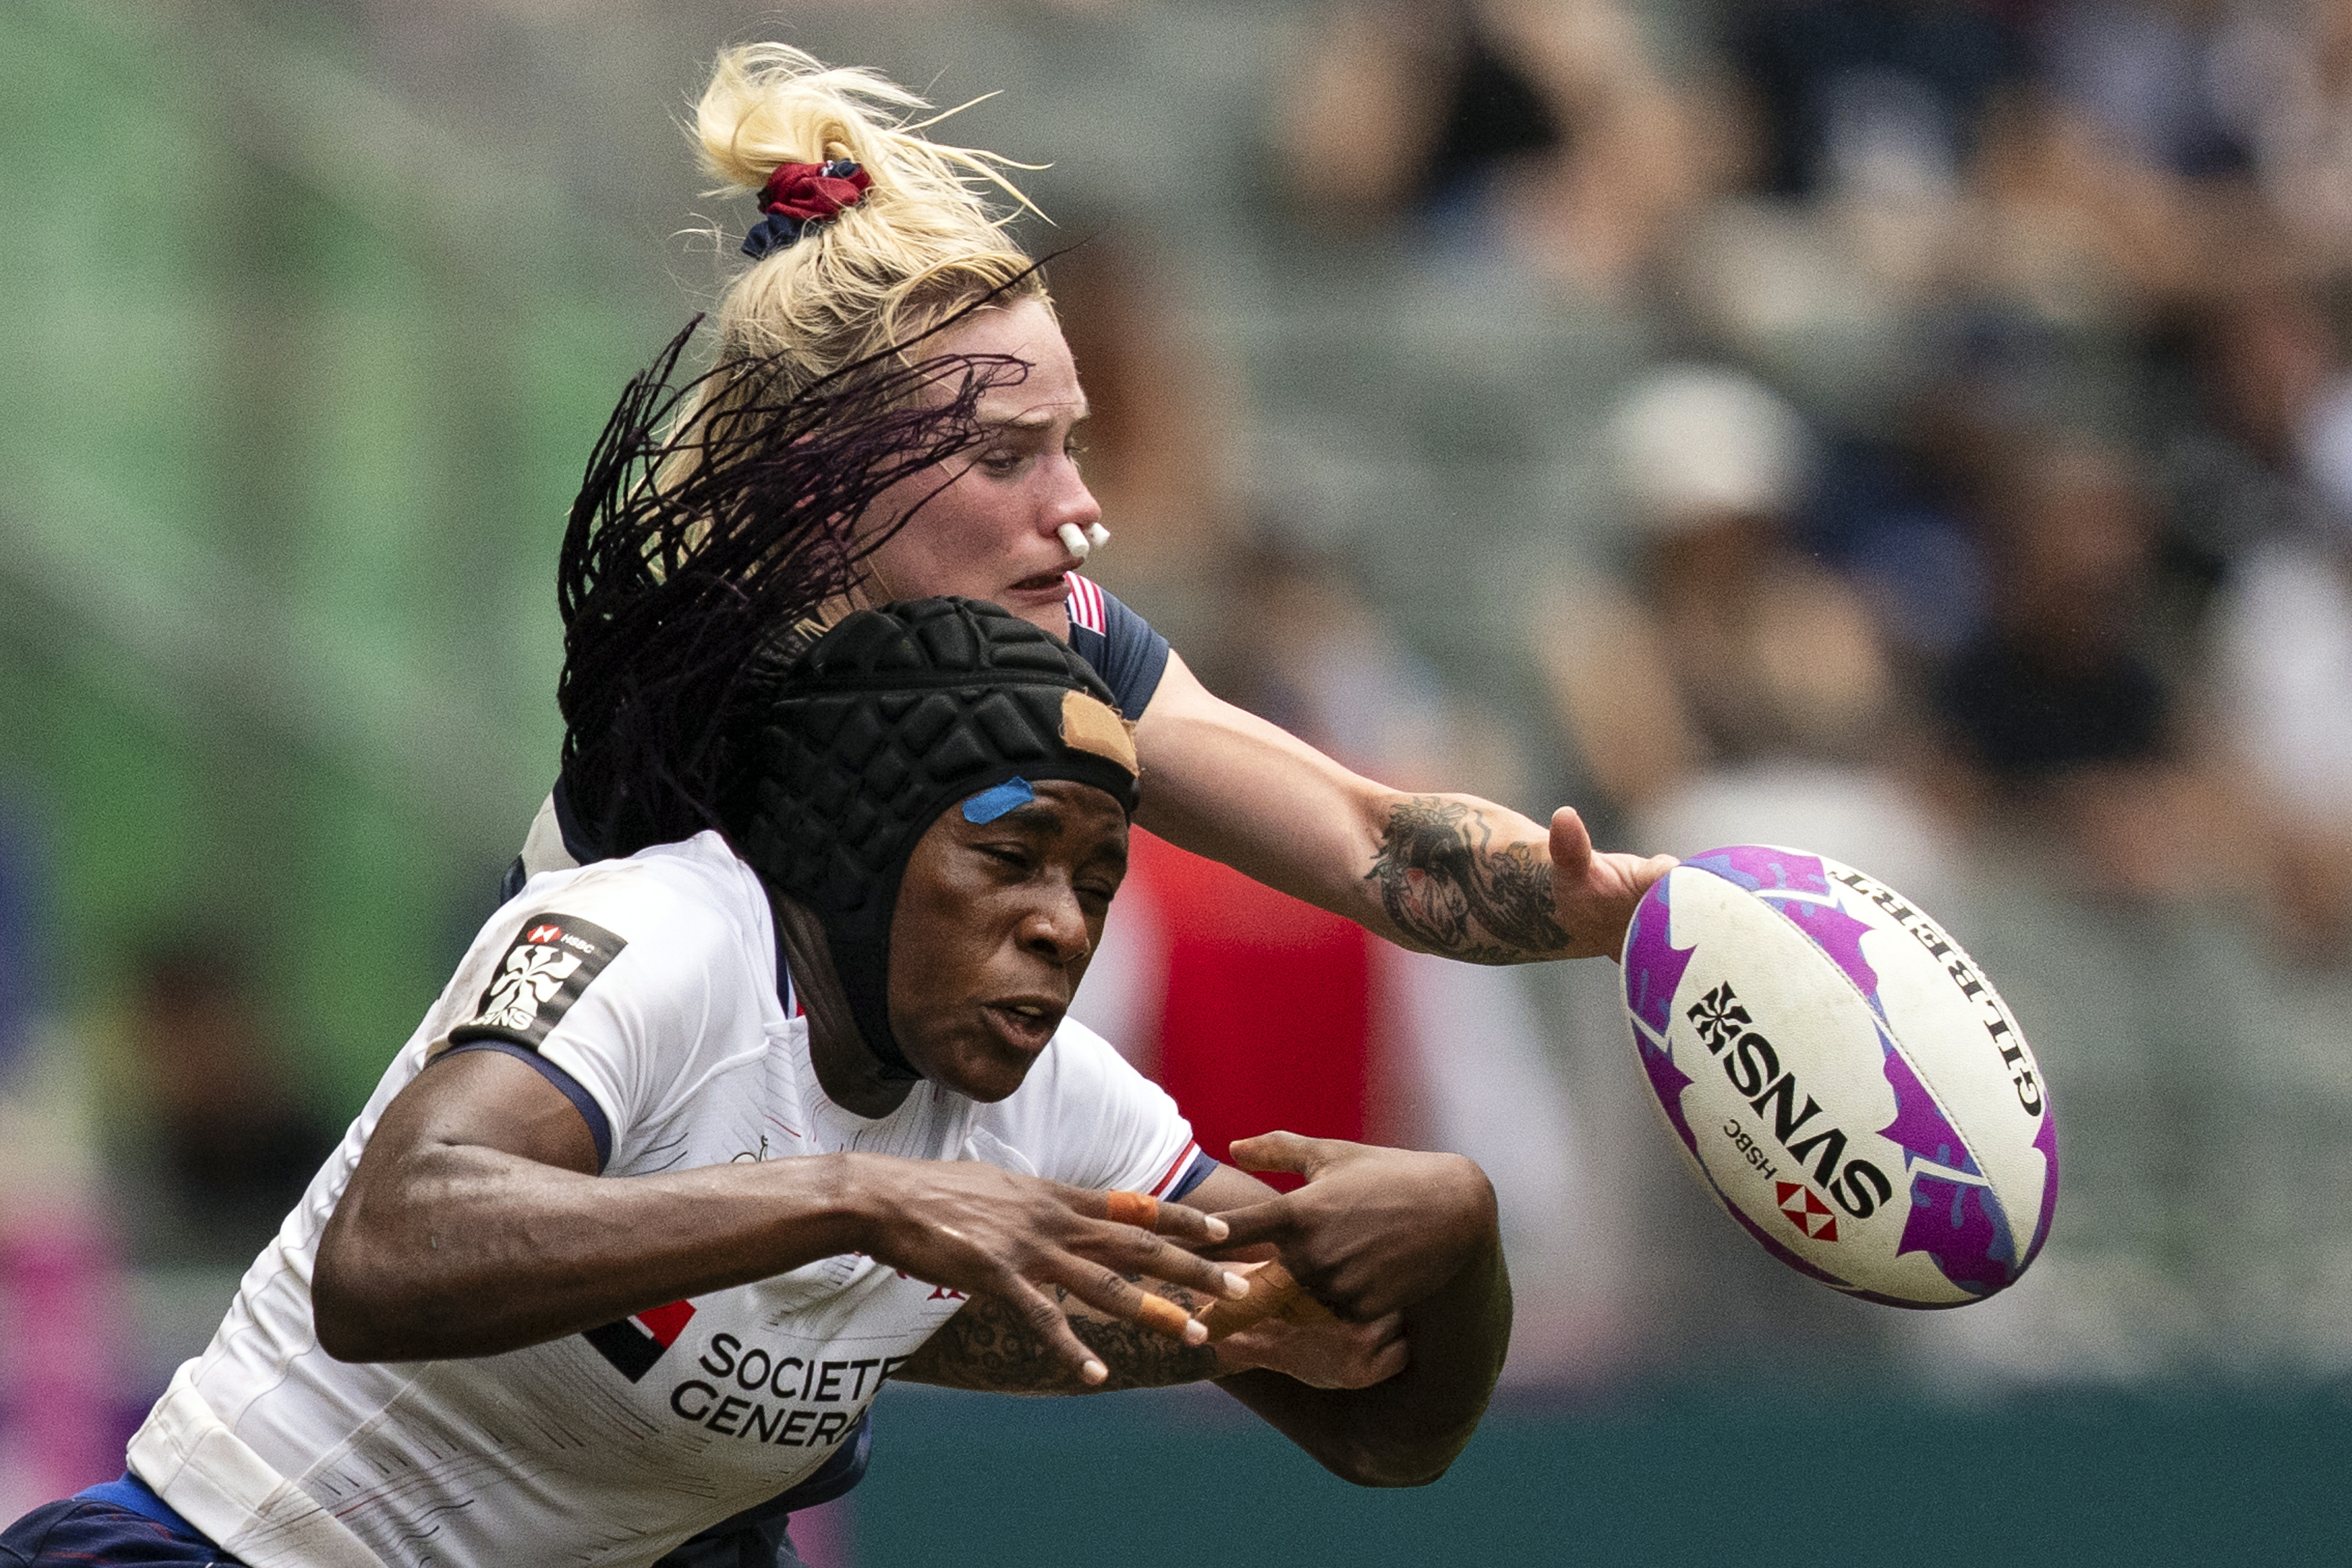 Exciting Rugby 7s action anticipated in 2025